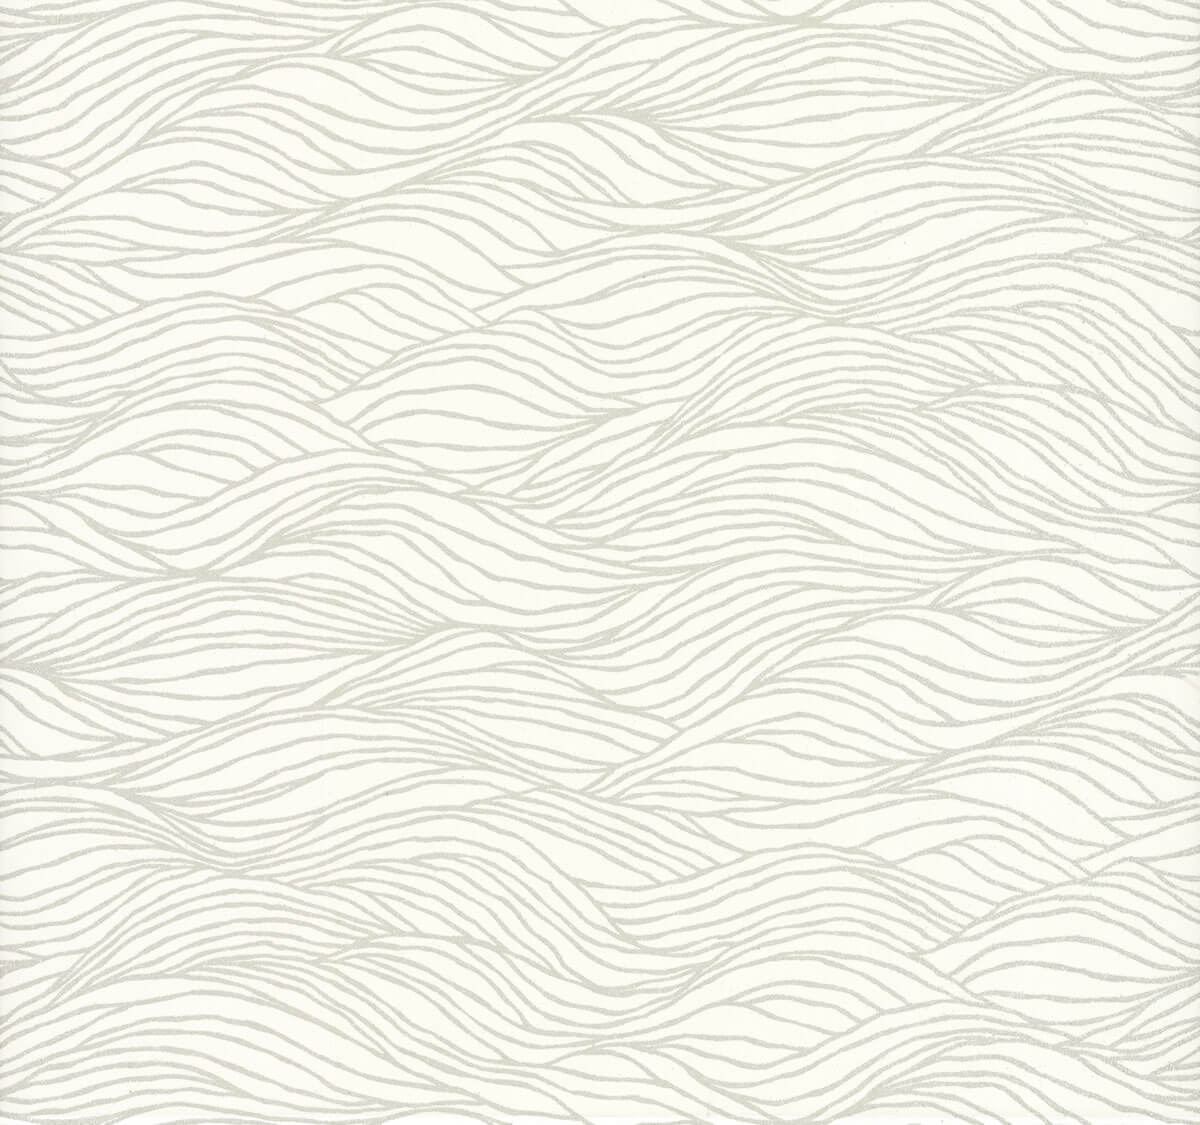 Sand Crest Wallpaper by Candice Olson - SAMPLE ONLY